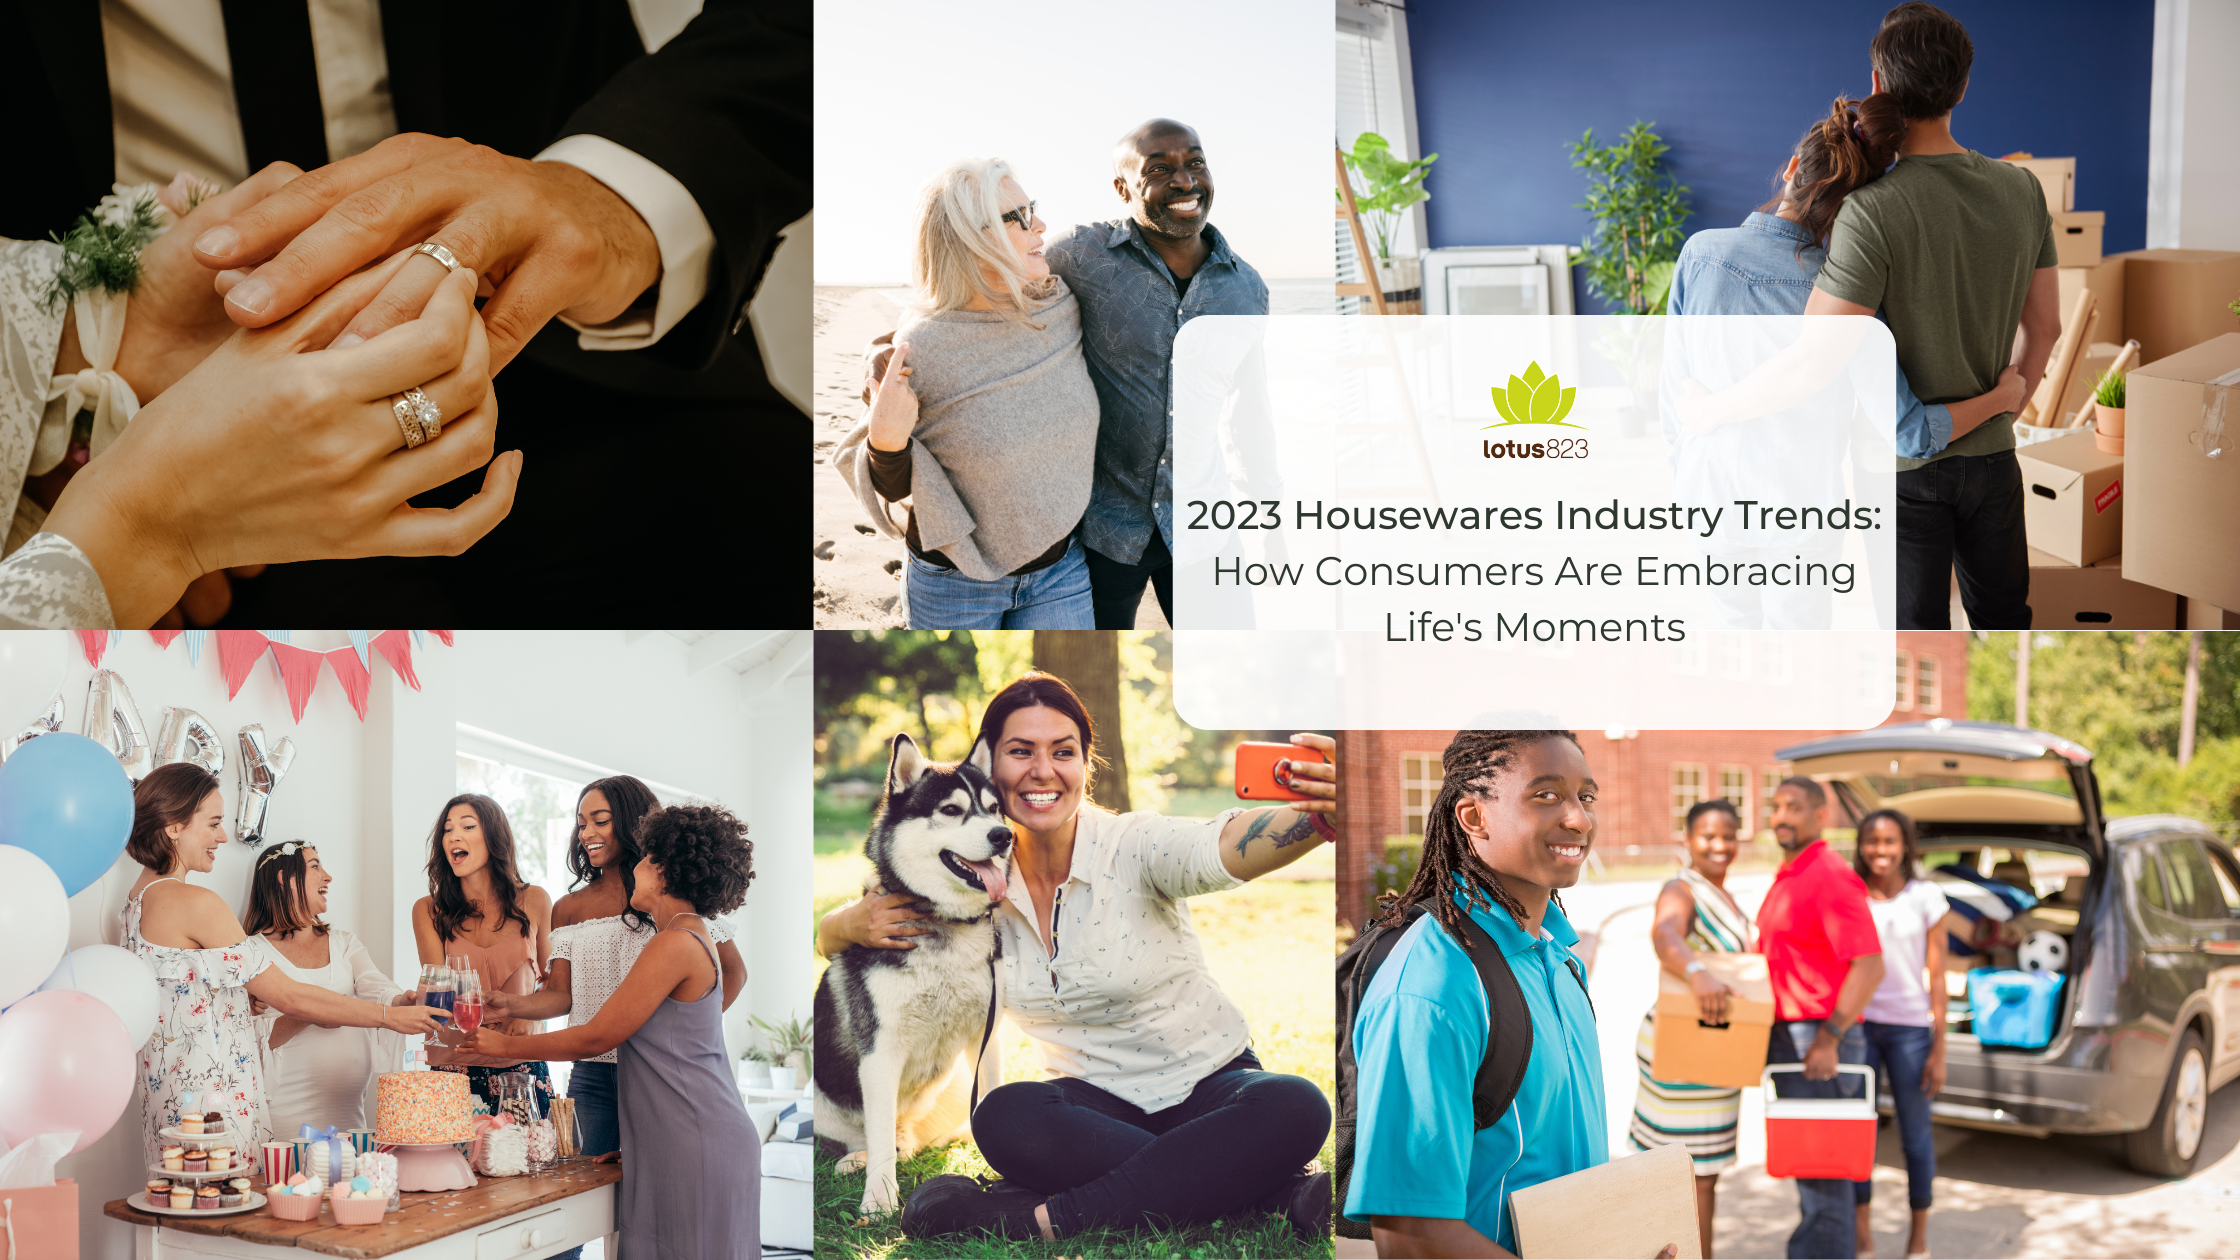 2023 Housewares Industry Trends: How Consumers Are Embracing